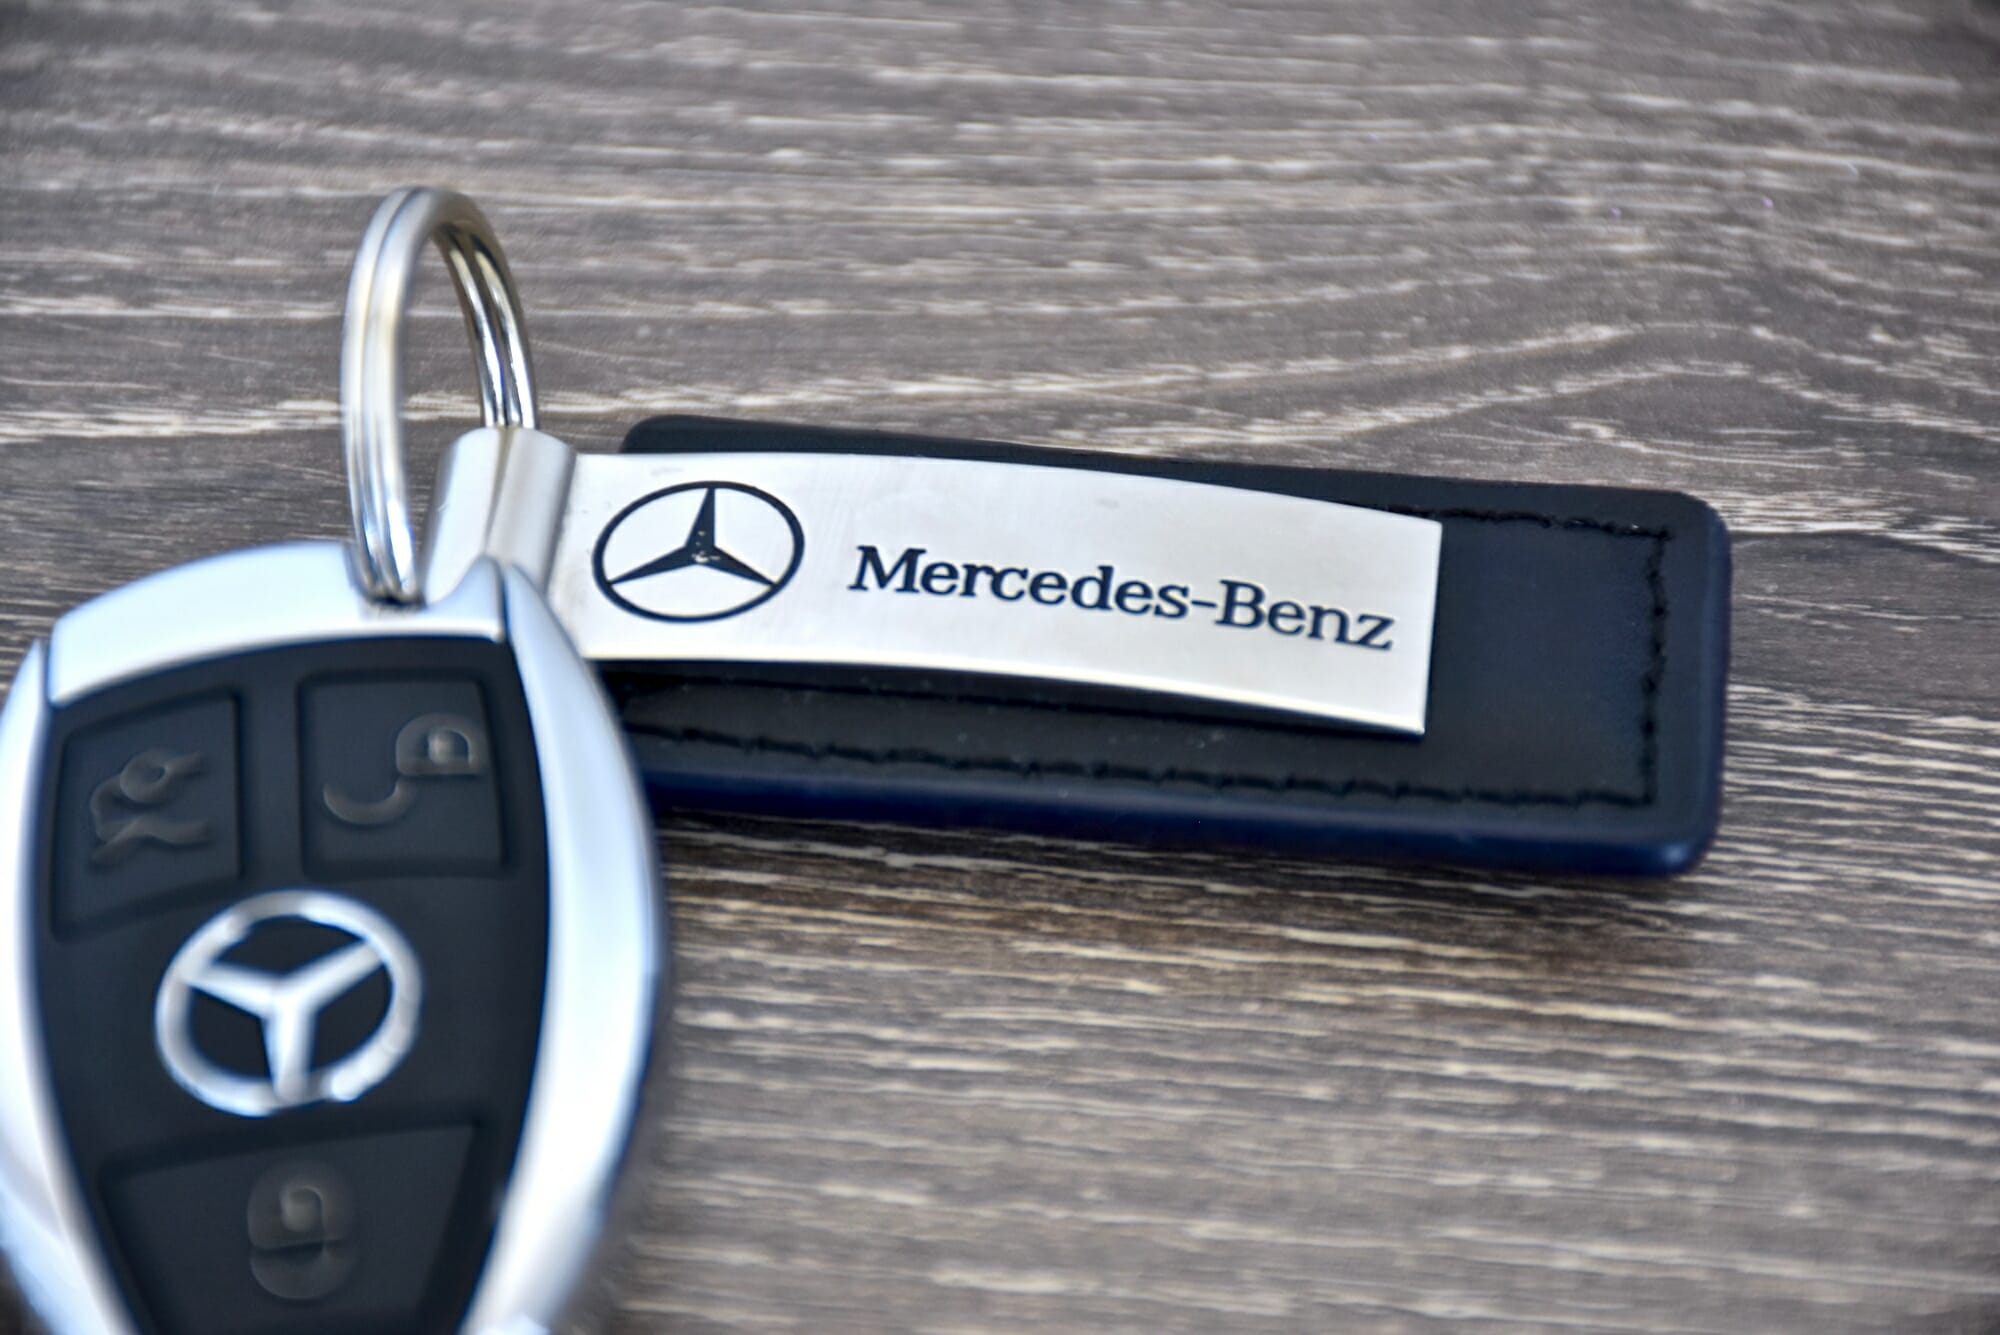 How To Change The Battery in Mercedes-Benz Key Fob?